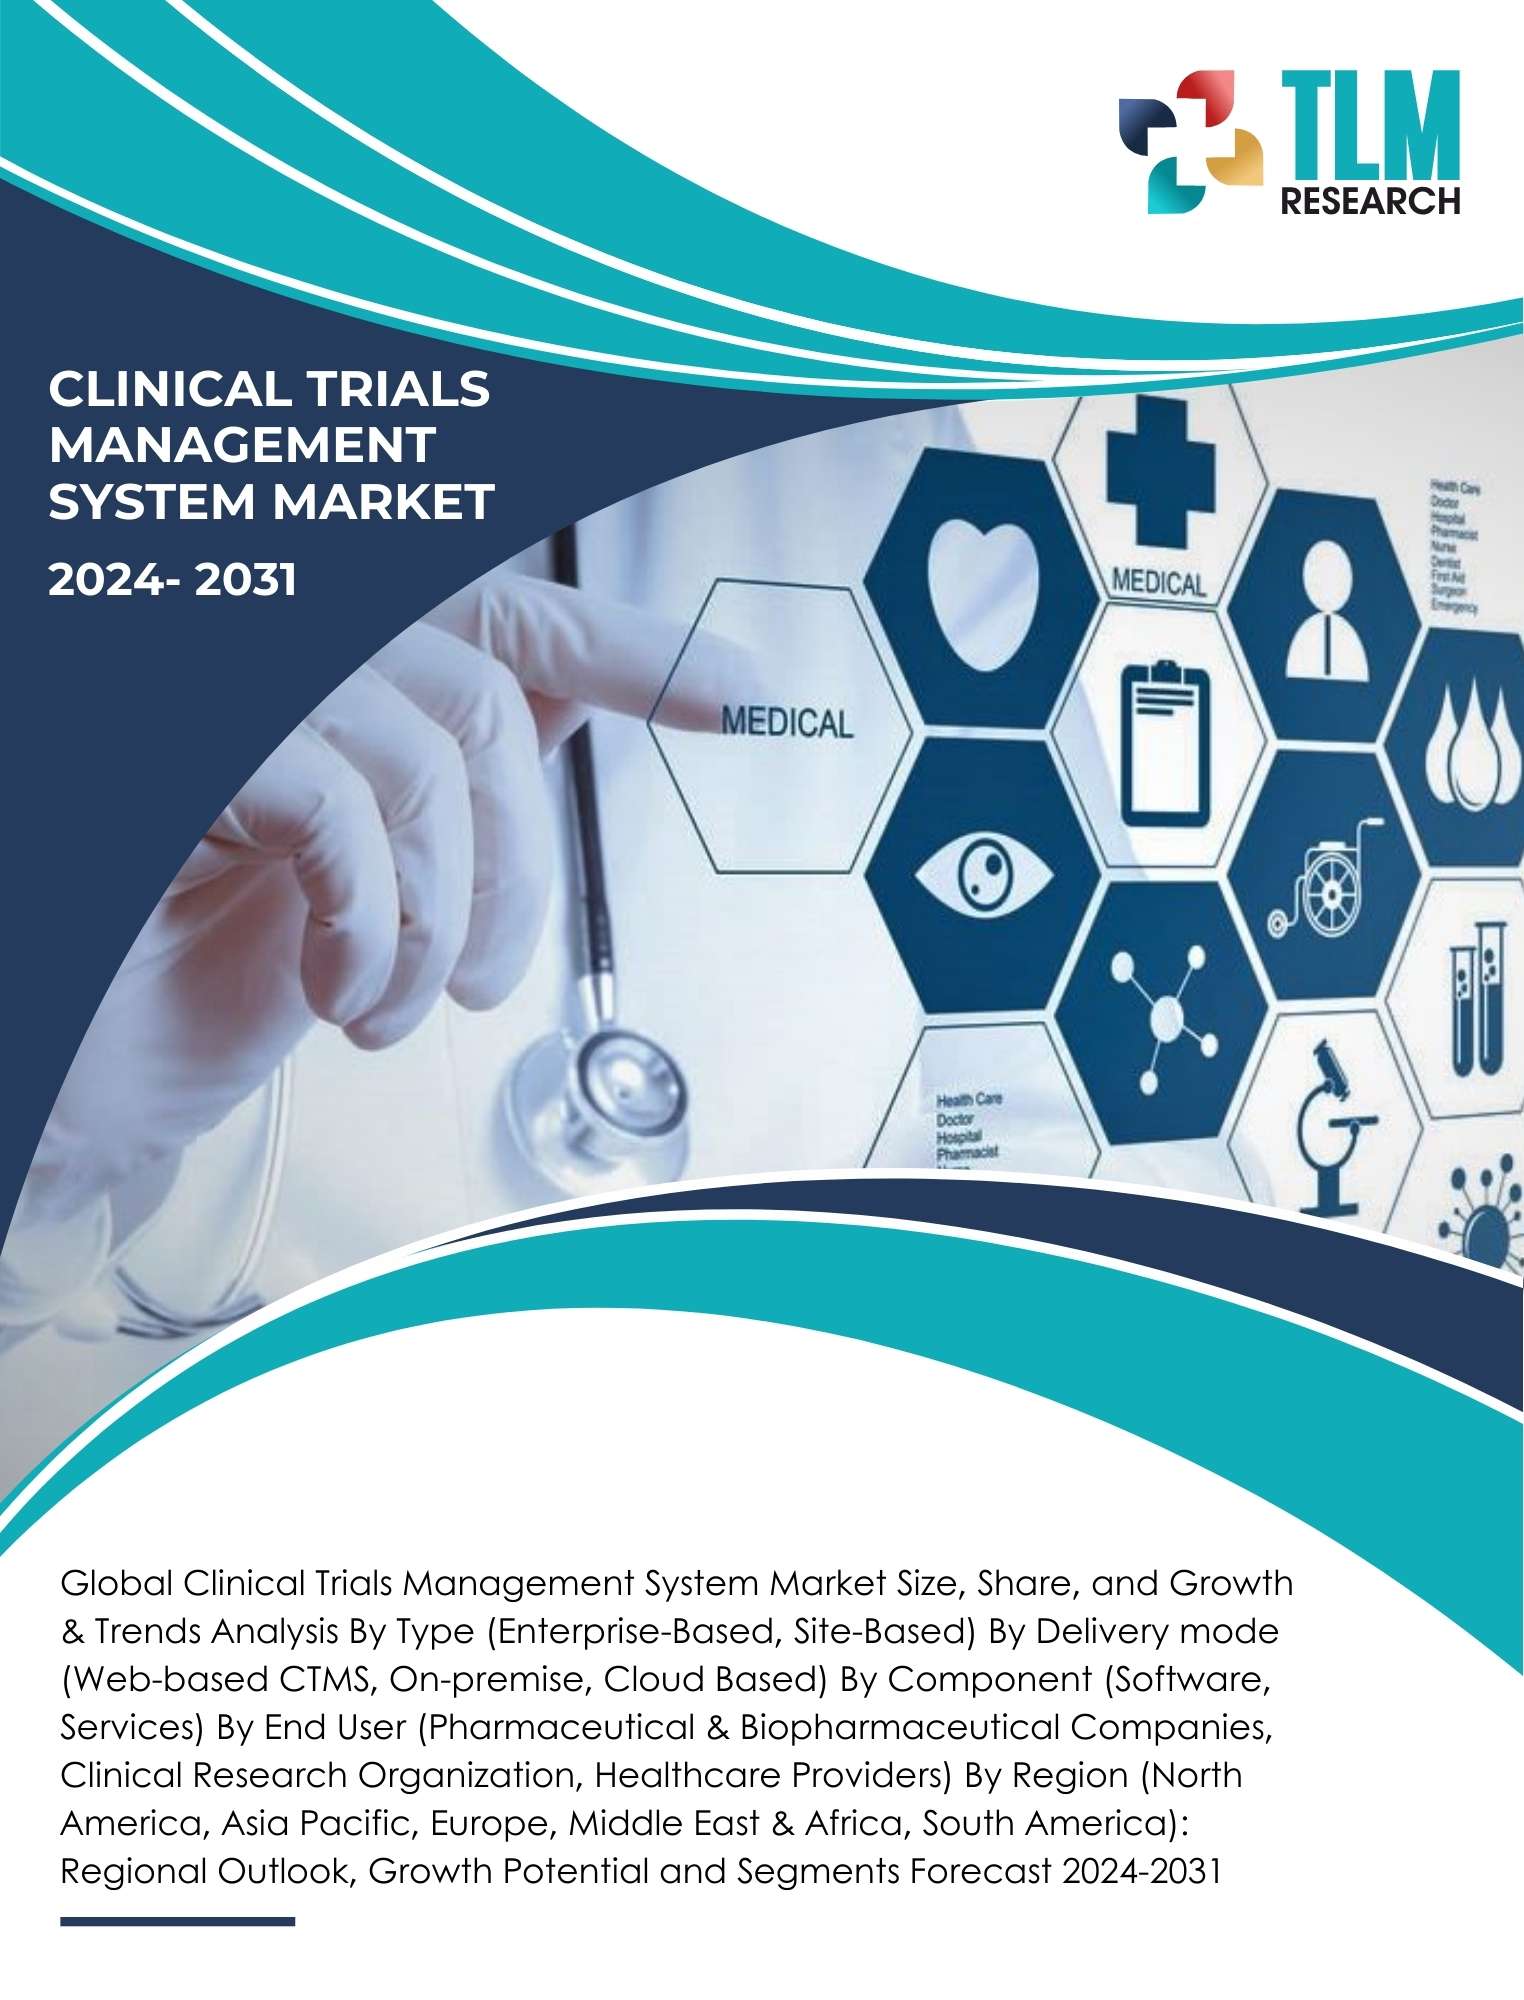 Clinical Trials Management System Market Report - 2031 | TLM Research